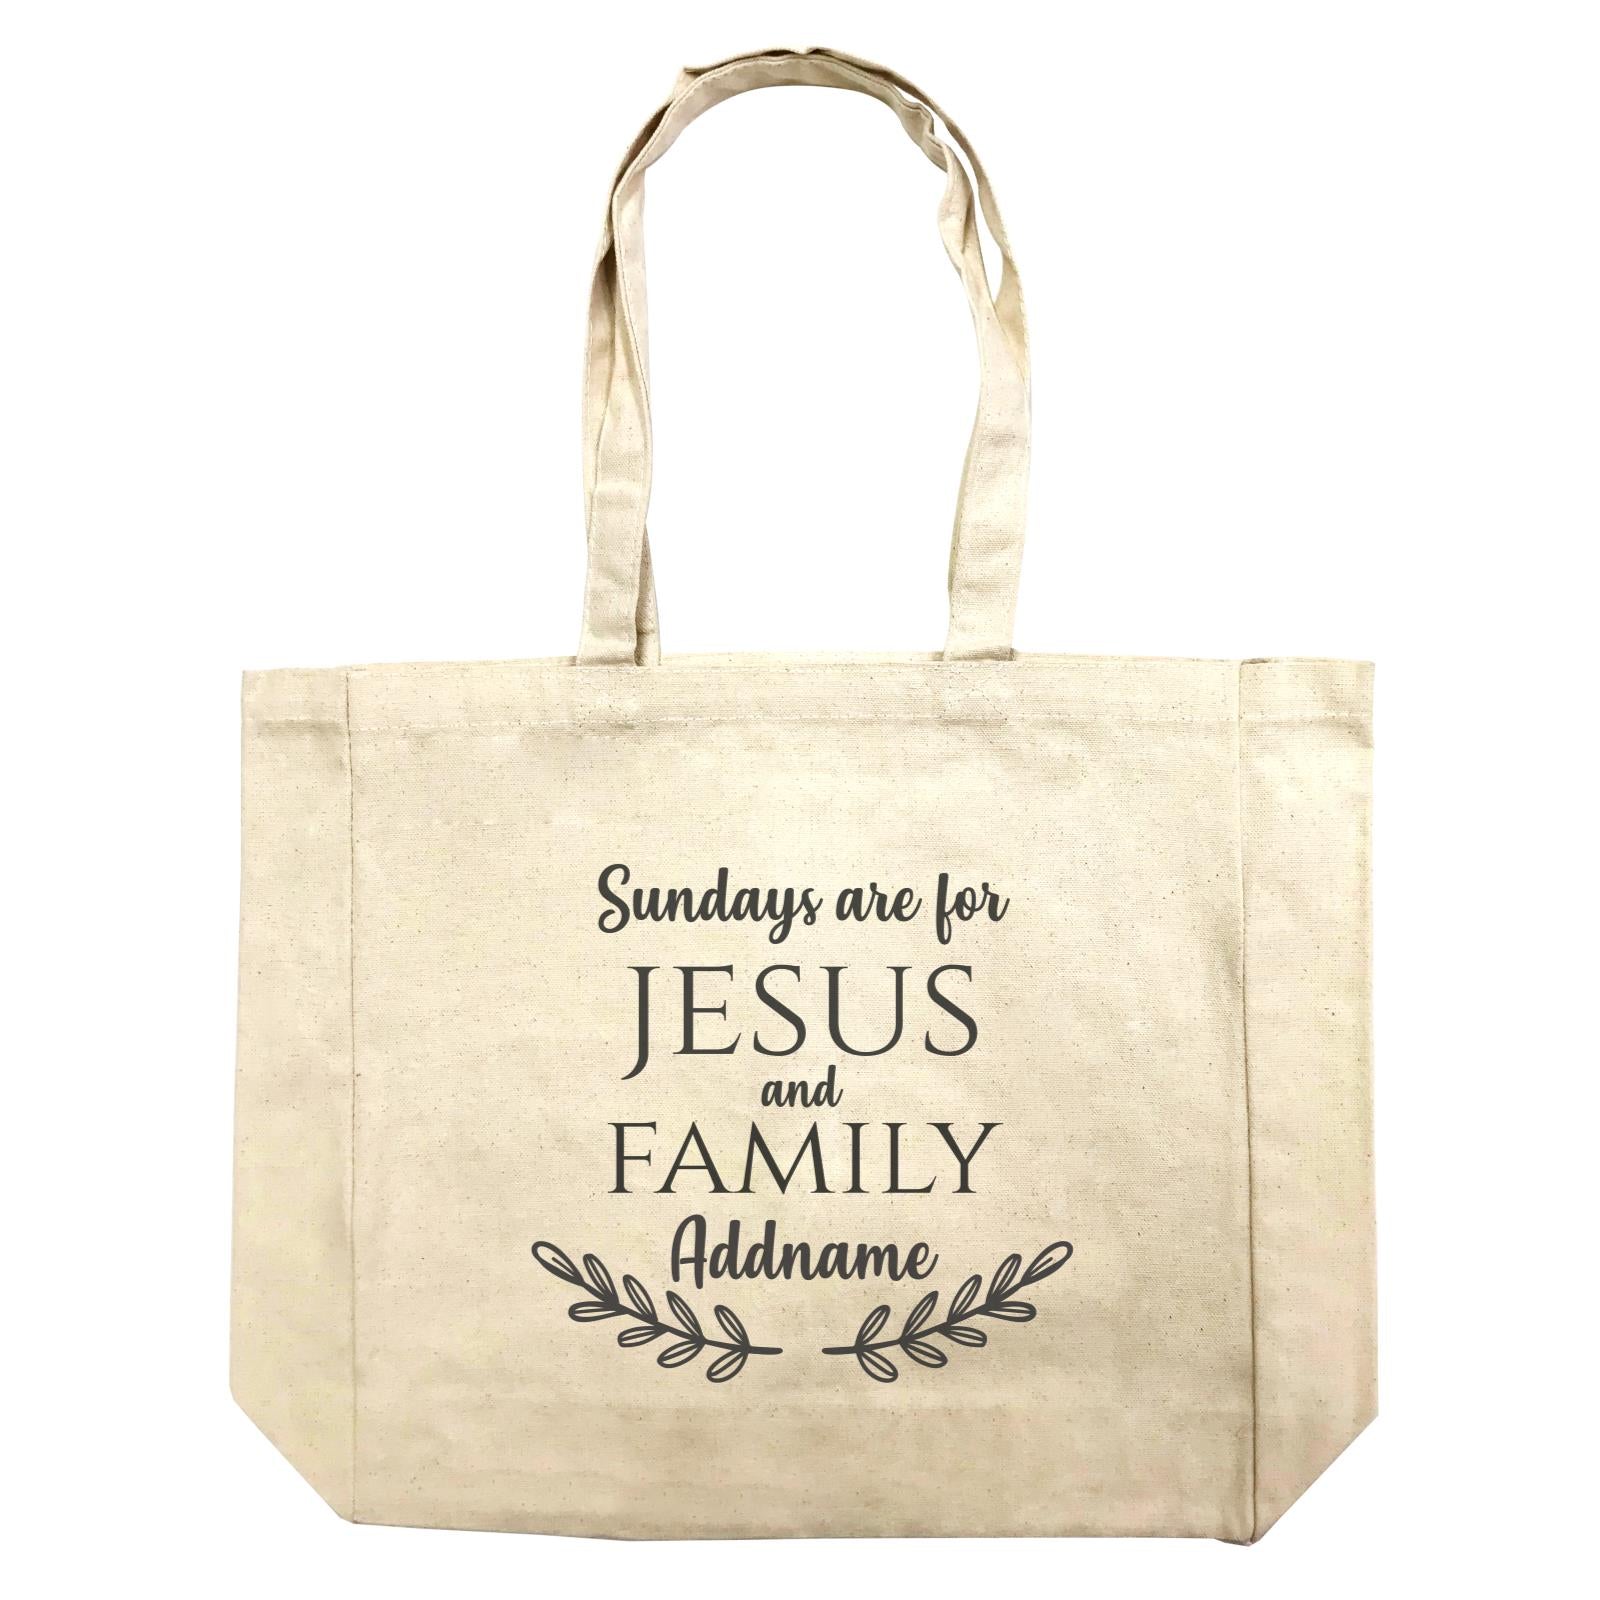 Christian Series Sundays Are For Jesus And Family Addname Shopping Bag